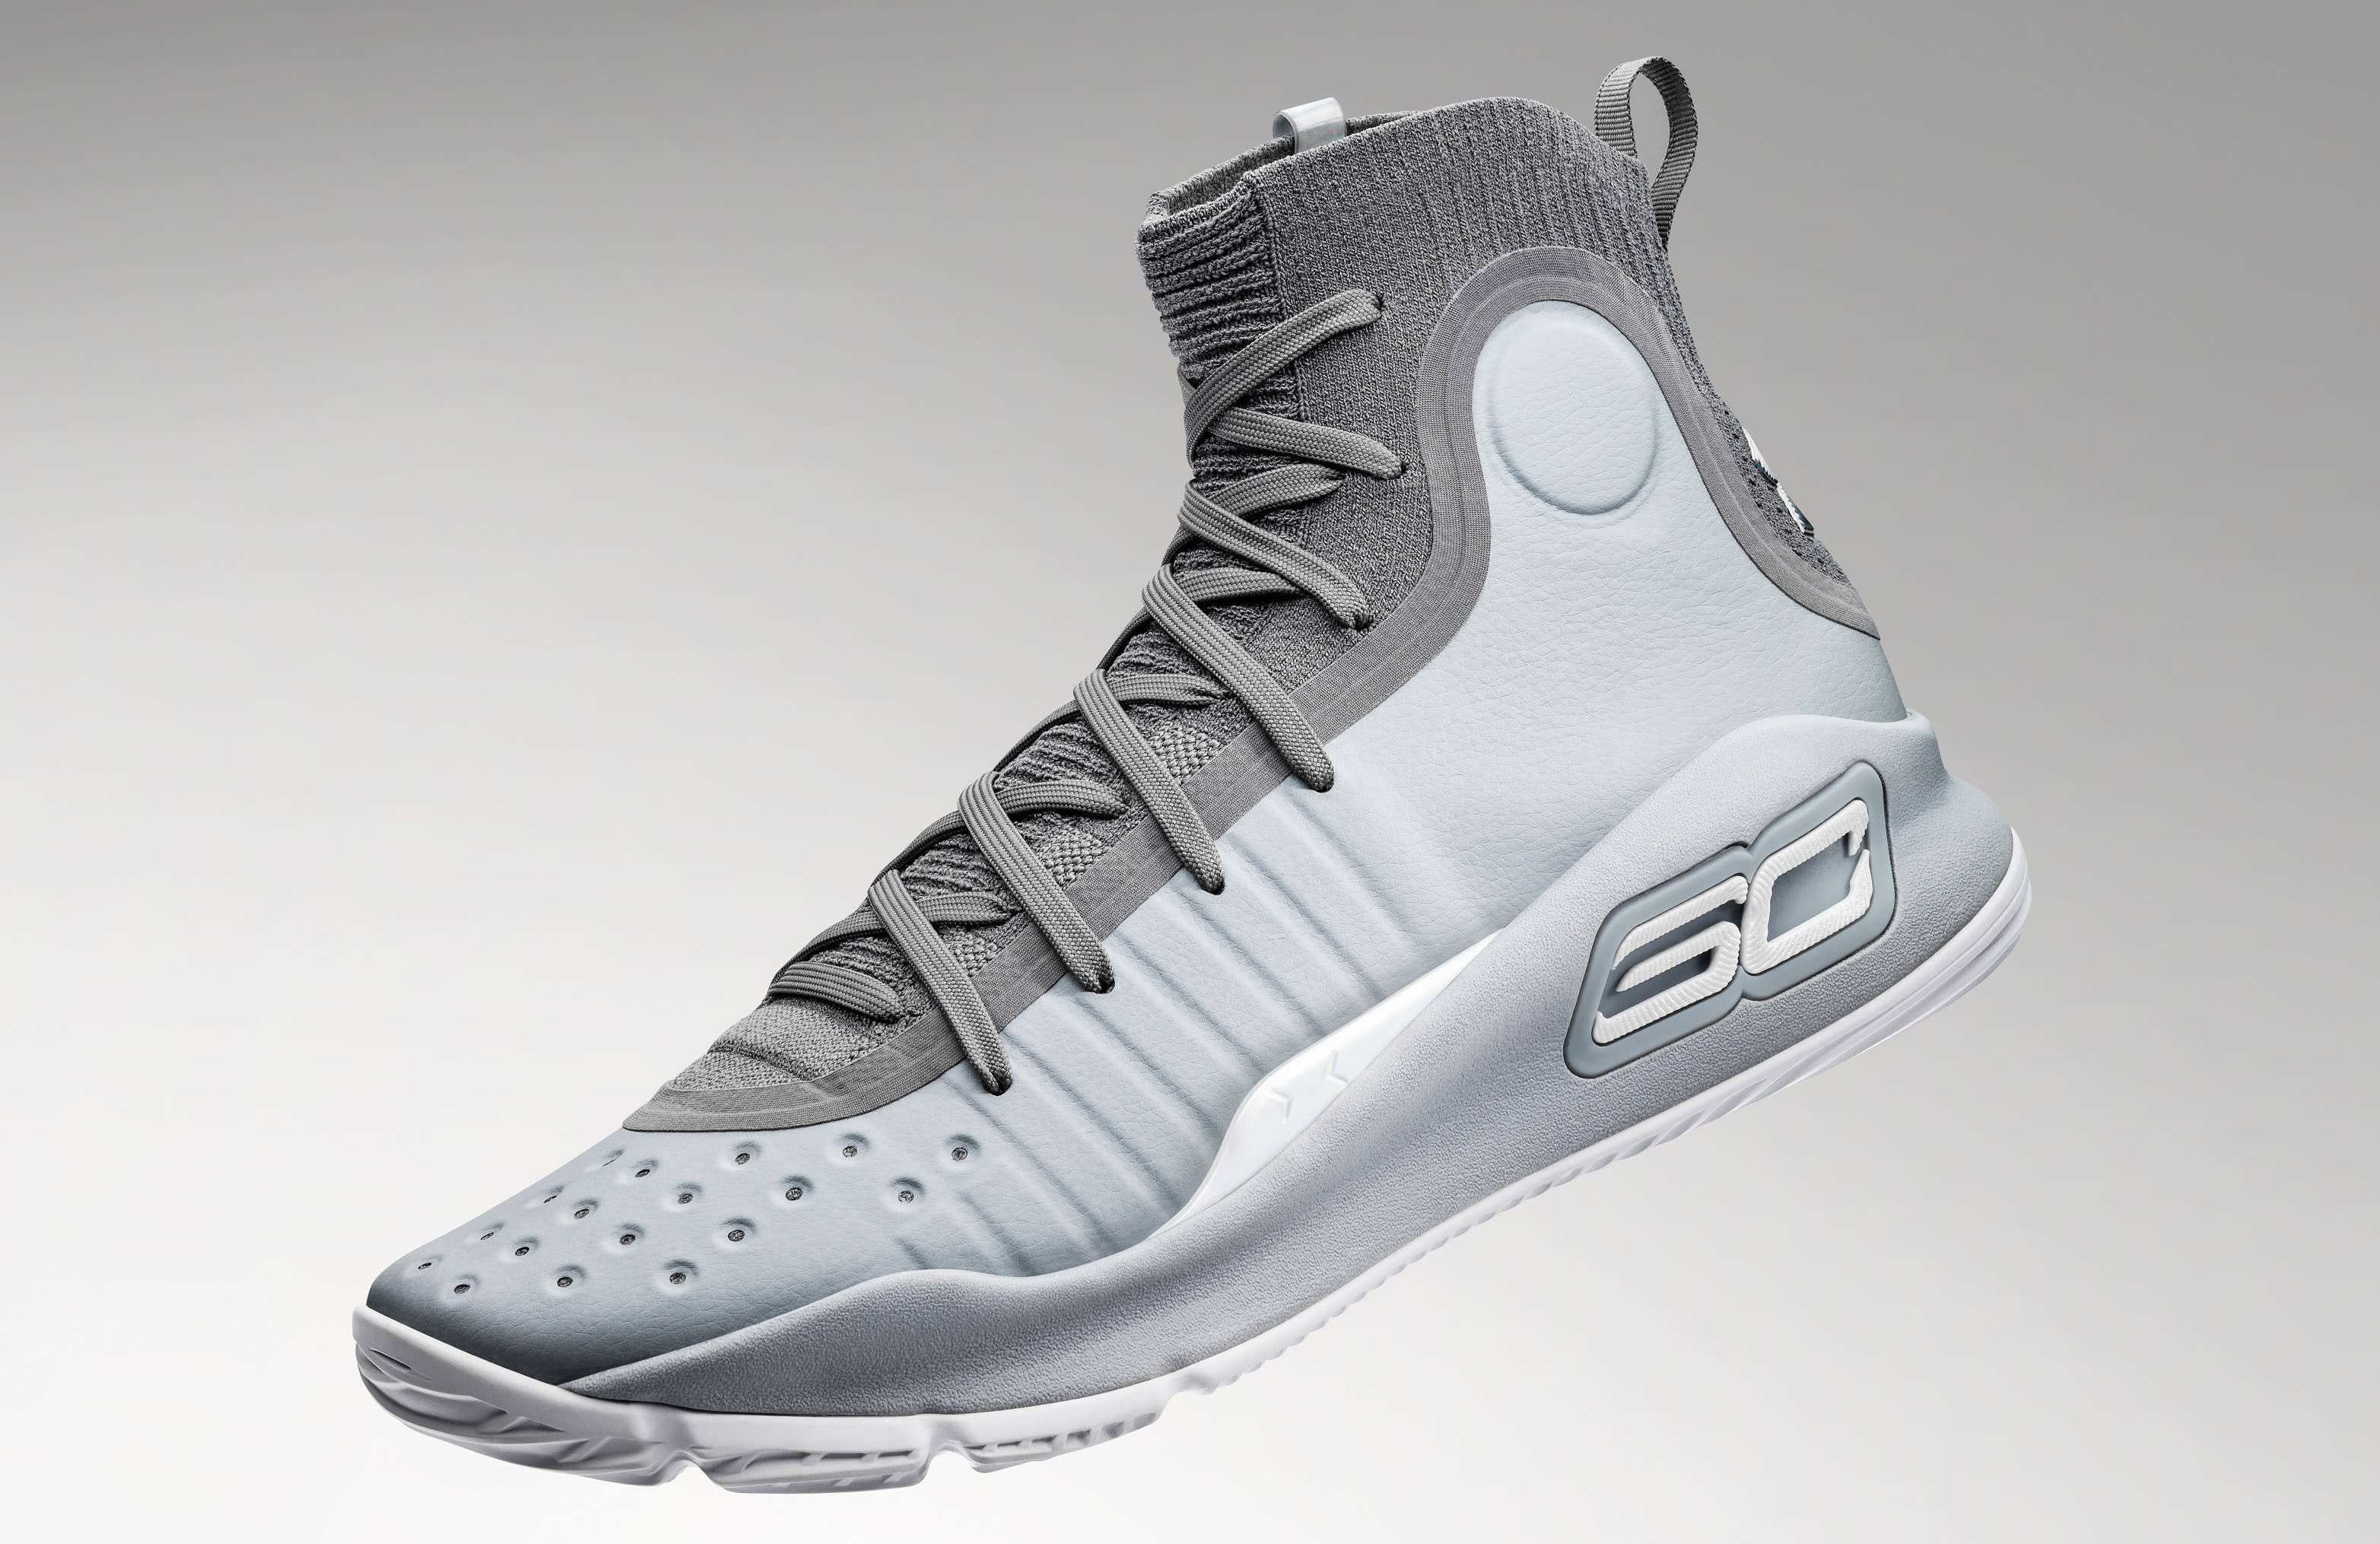 Under Armour Curry 4 'More Buckets' 1298306 107 (Lateral)